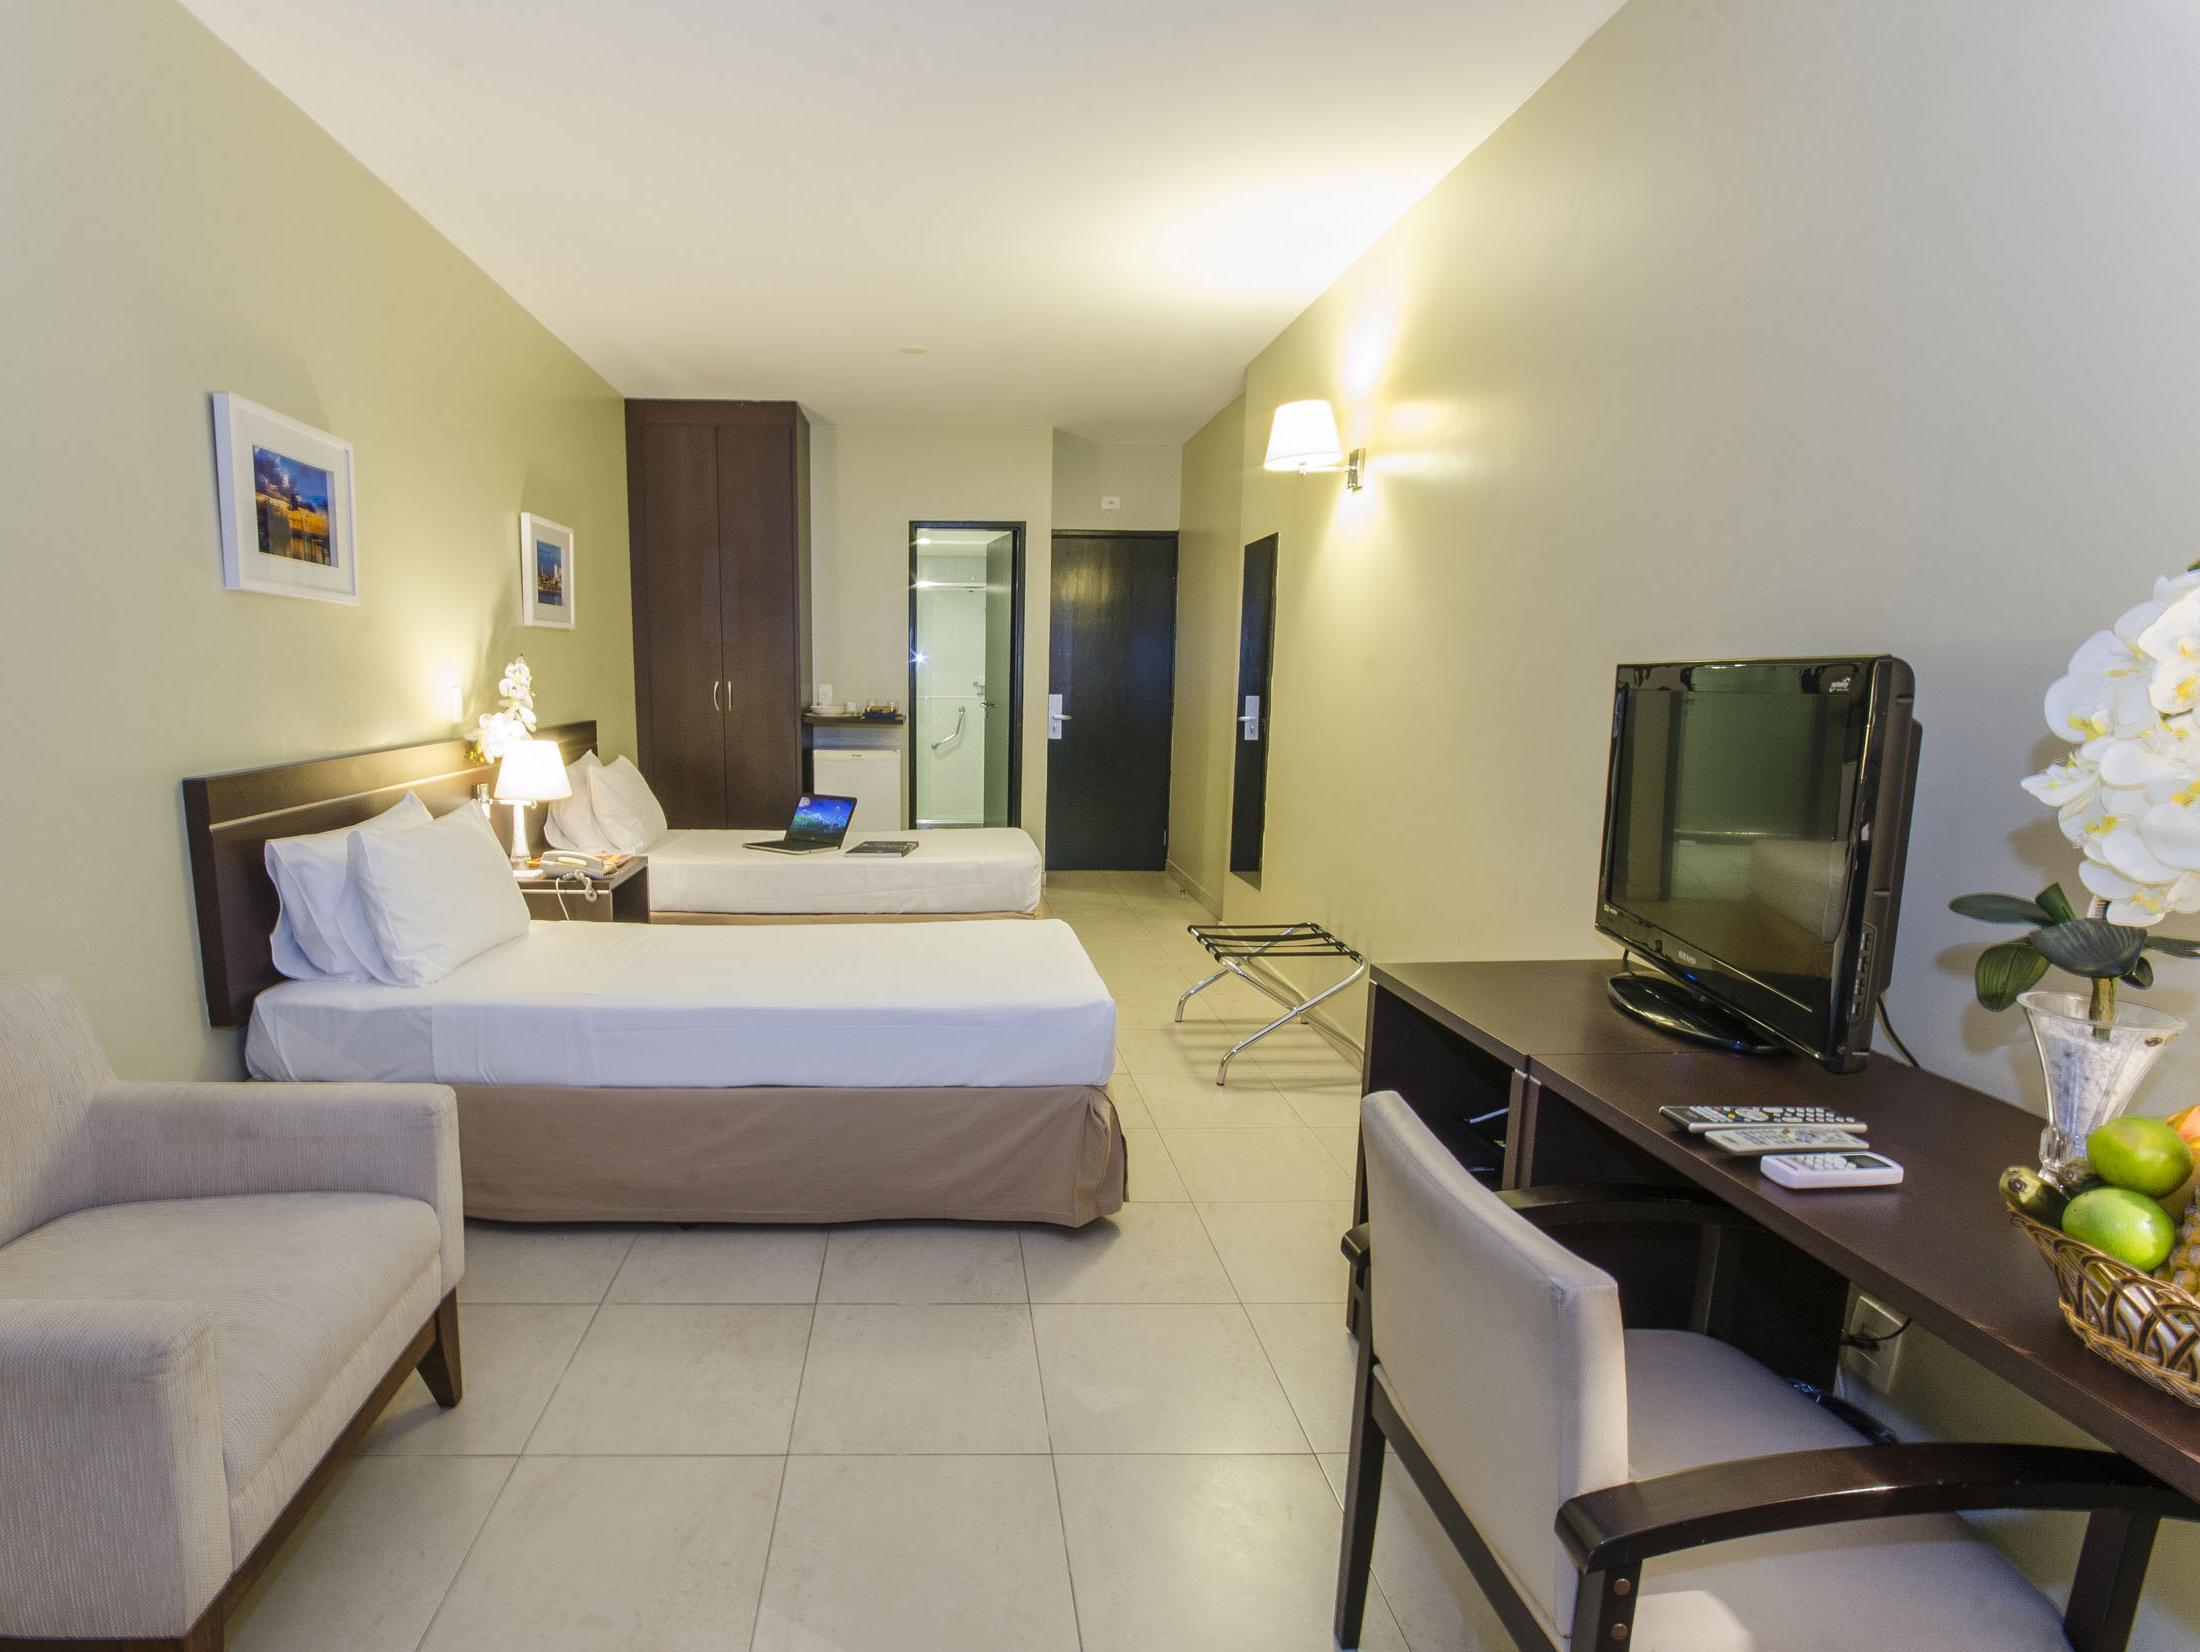 Hotel Saint Paul Manaus FAQ 2016, What facilities are there in Hotel Saint Paul Manaus 2016, What Languages Spoken are Supported in Hotel Saint Paul Manaus 2016, Which payment cards are accepted in Hotel Saint Paul Manaus , Manaus Hotel Saint Paul room facilities and services Q&A 2016, Manaus Hotel Saint Paul online booking services 2016, Manaus Hotel Saint Paul address 2016, Manaus Hotel Saint Paul telephone number 2016,Manaus Hotel Saint Paul map 2016, Manaus Hotel Saint Paul traffic guide 2016, how to go Manaus Hotel Saint Paul, Manaus Hotel Saint Paul booking online 2016, Manaus Hotel Saint Paul room types 2016.